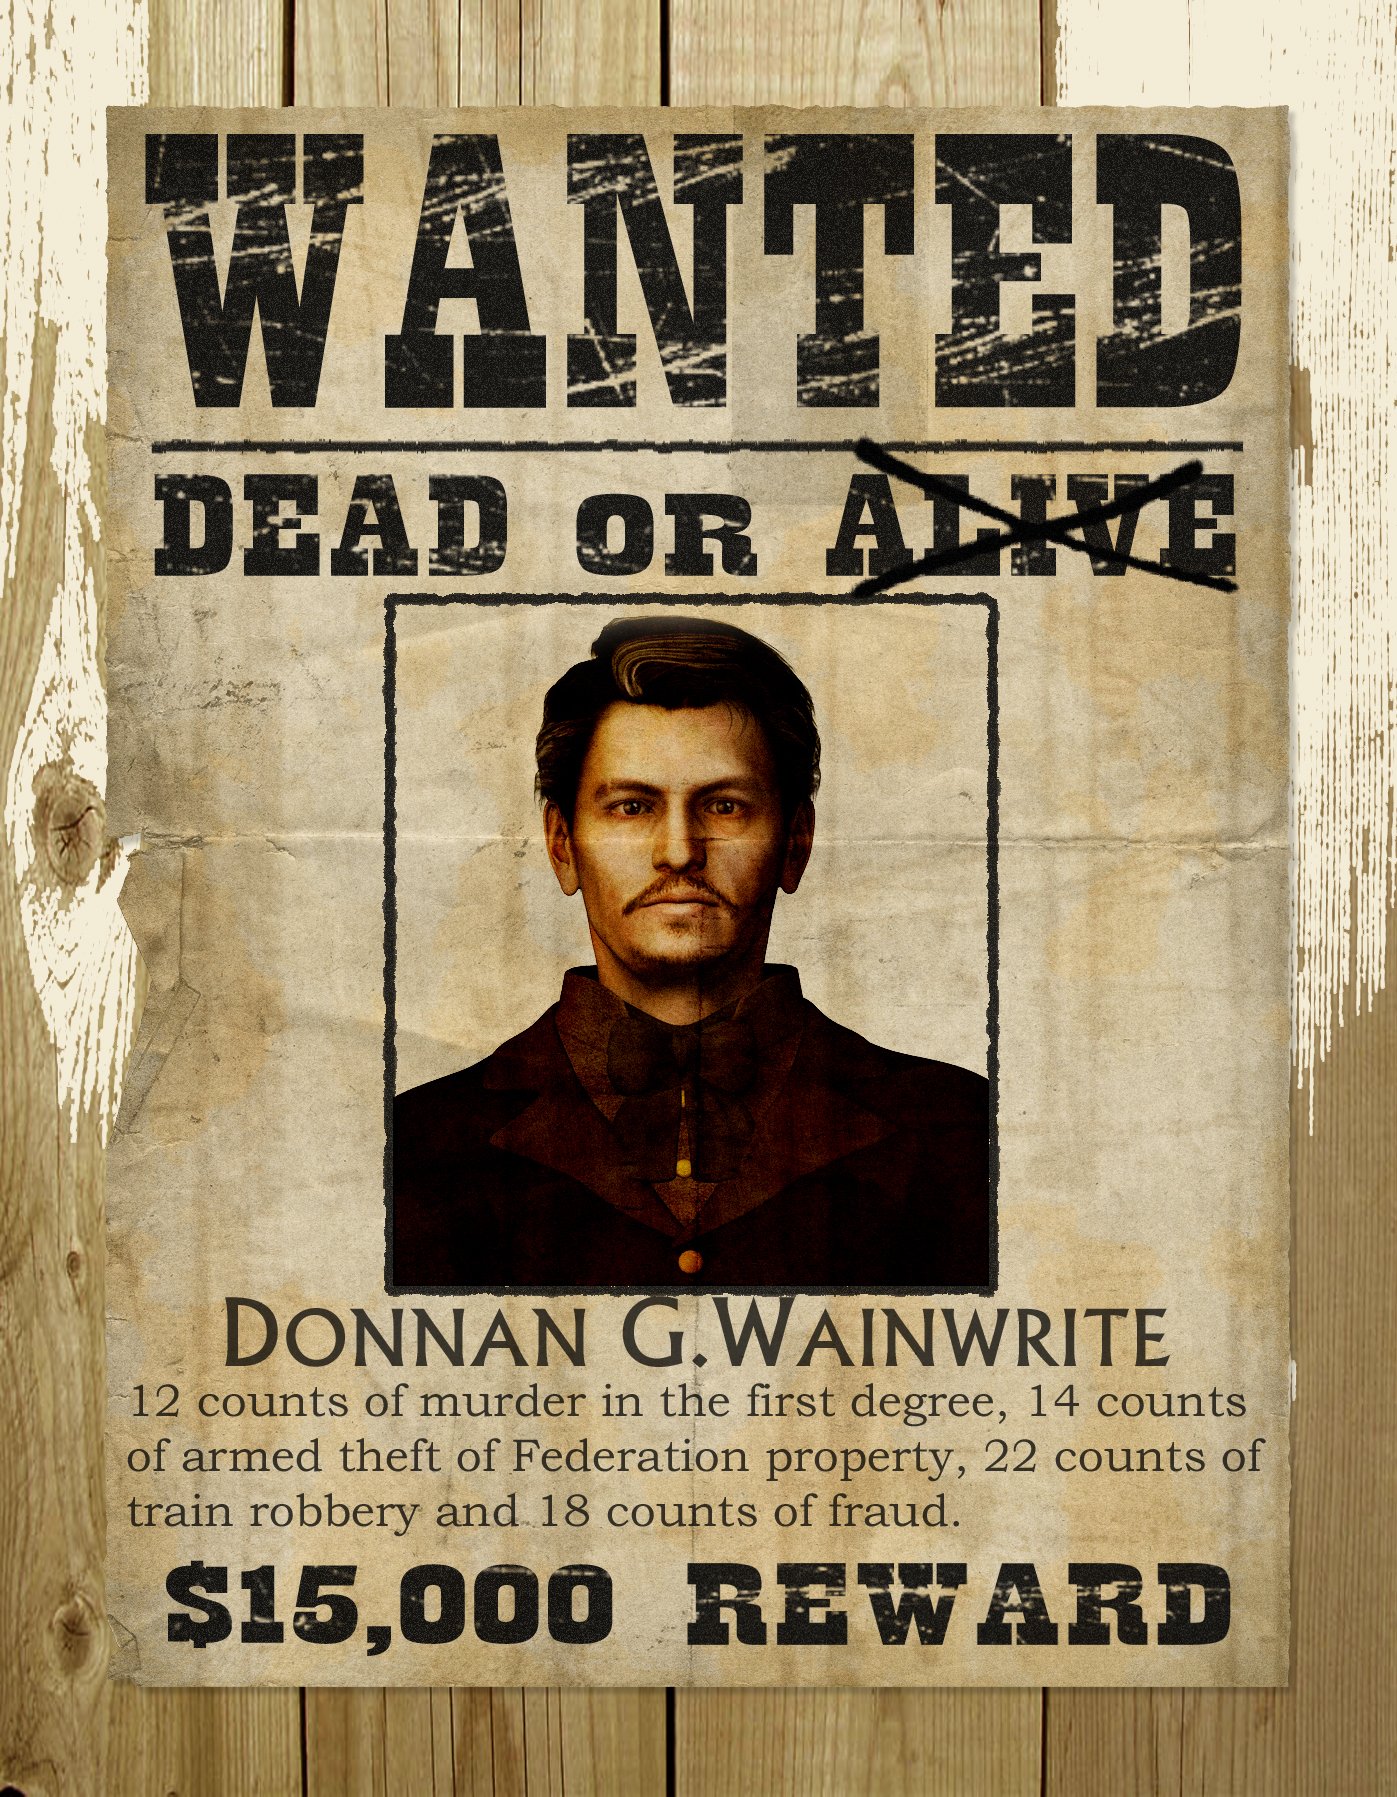 Lived talked wanted. Wanted плакат. Плакаты в стиле wanted. Плакат разыскивается. Плакат розыска дикий Запад.